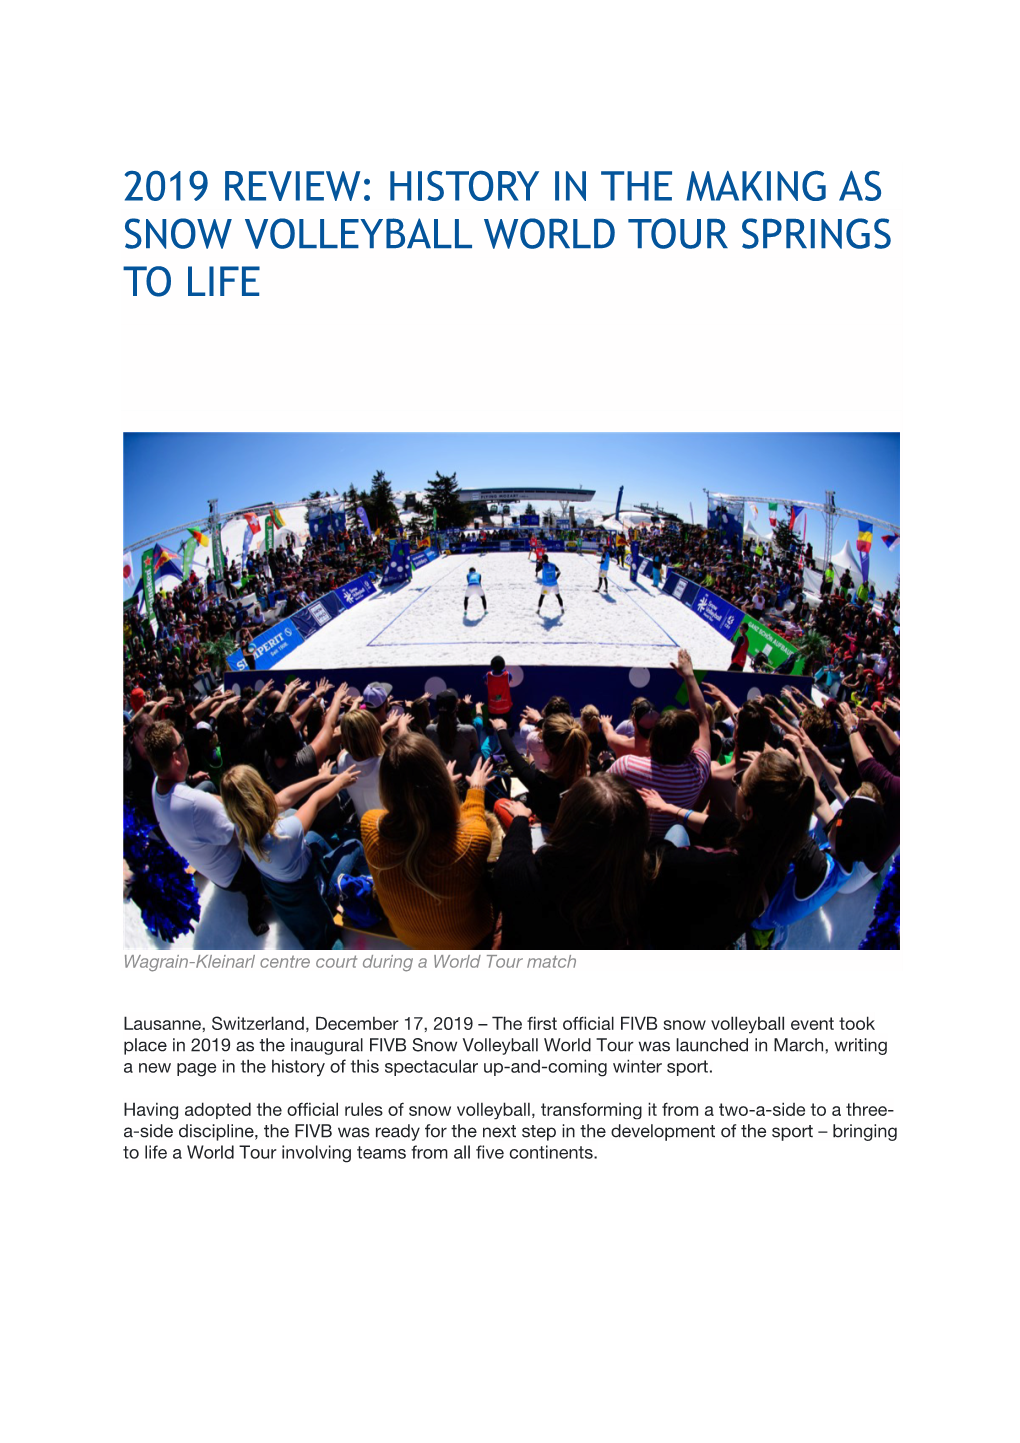 2019 Review: History in the Making As Snow Volleyball World Tour Springs to Life